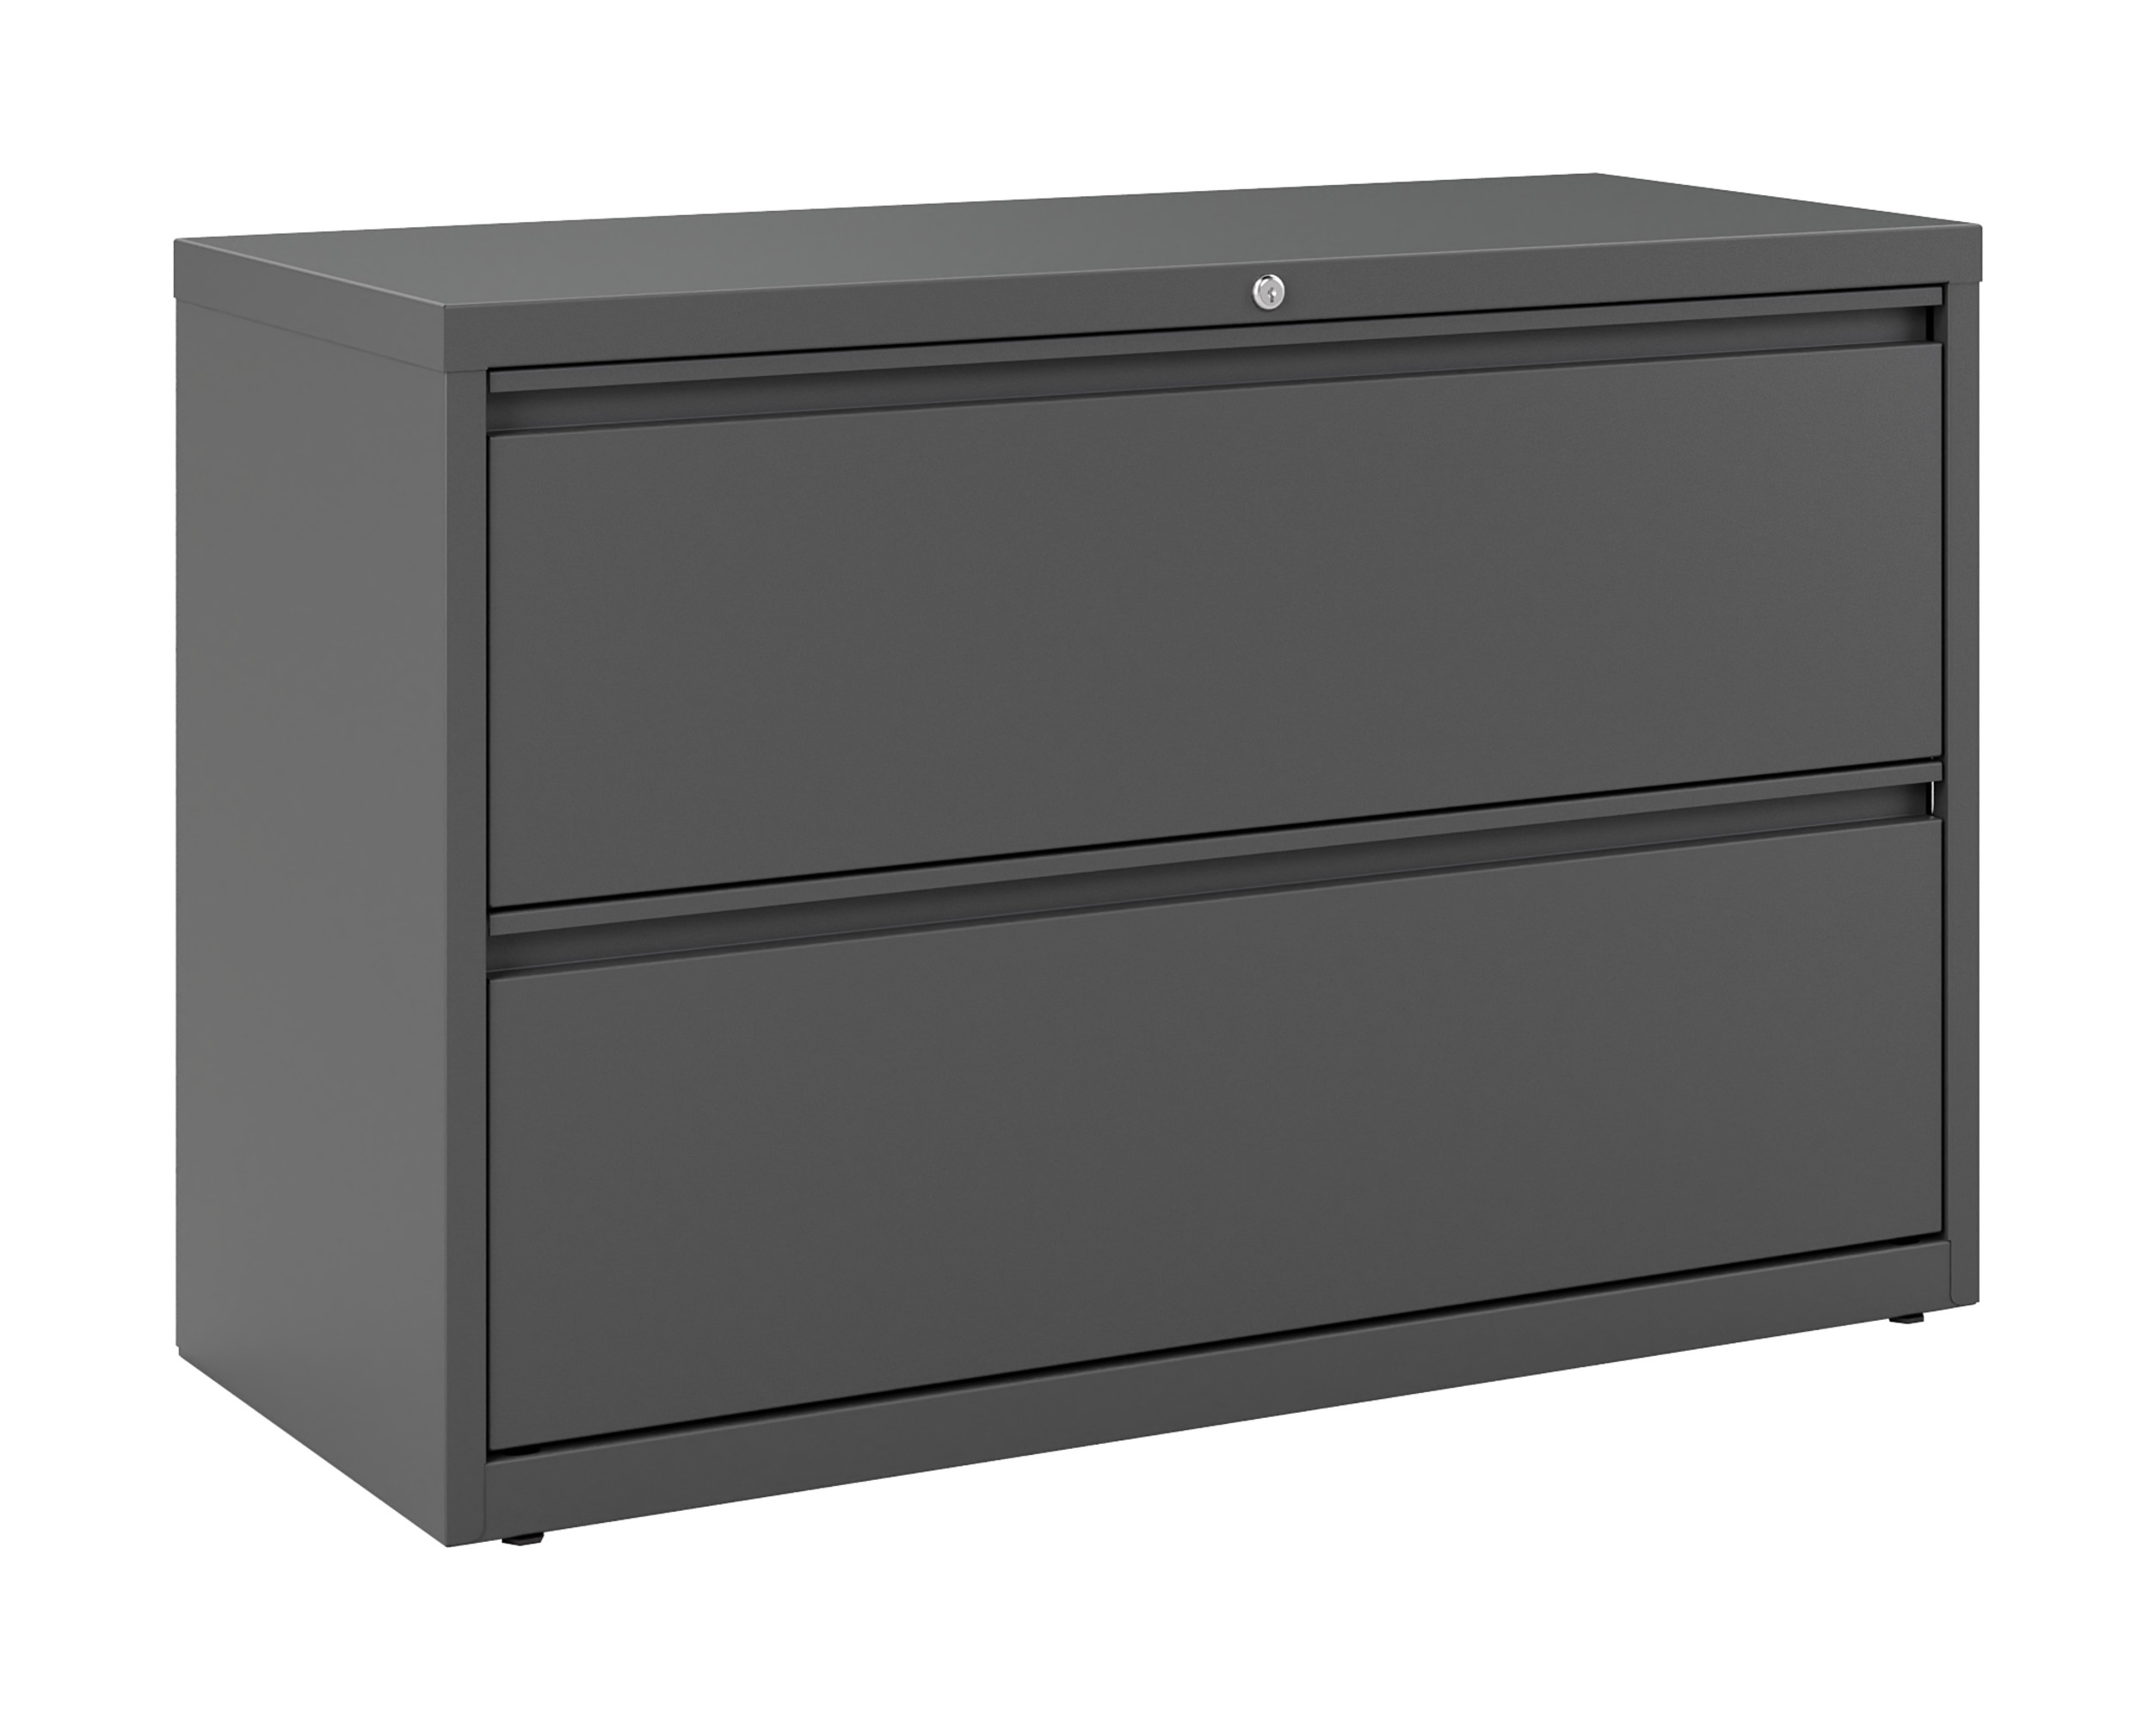 Hirsh 42 Inch Wide 2 Drawer Metal Lateral File Cabinet for Home and Office, Holds Letter, Legal and A4 Hanging Folders, Charcoal - image 1 of 7